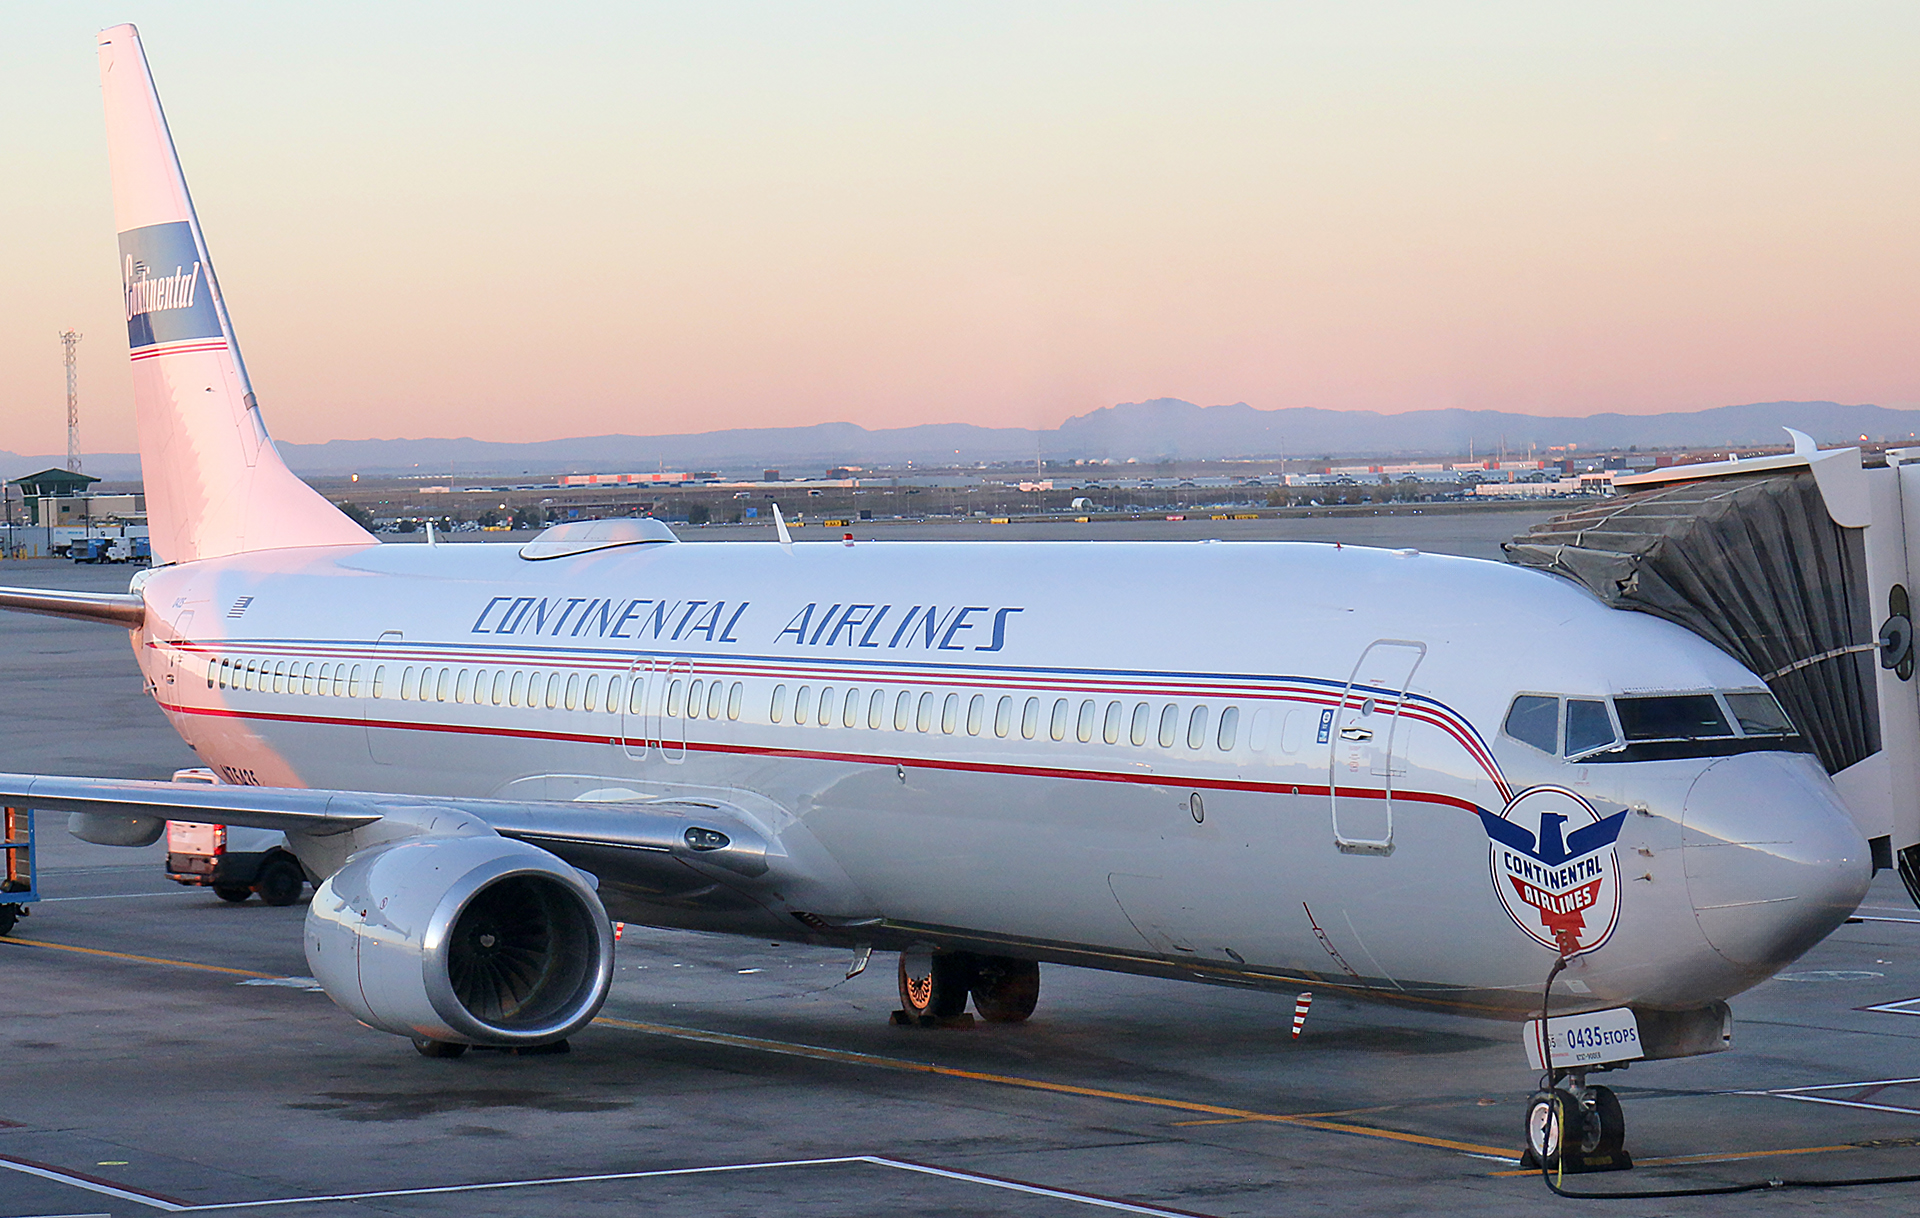 United Airlines Continental Airlines Vintage Livery